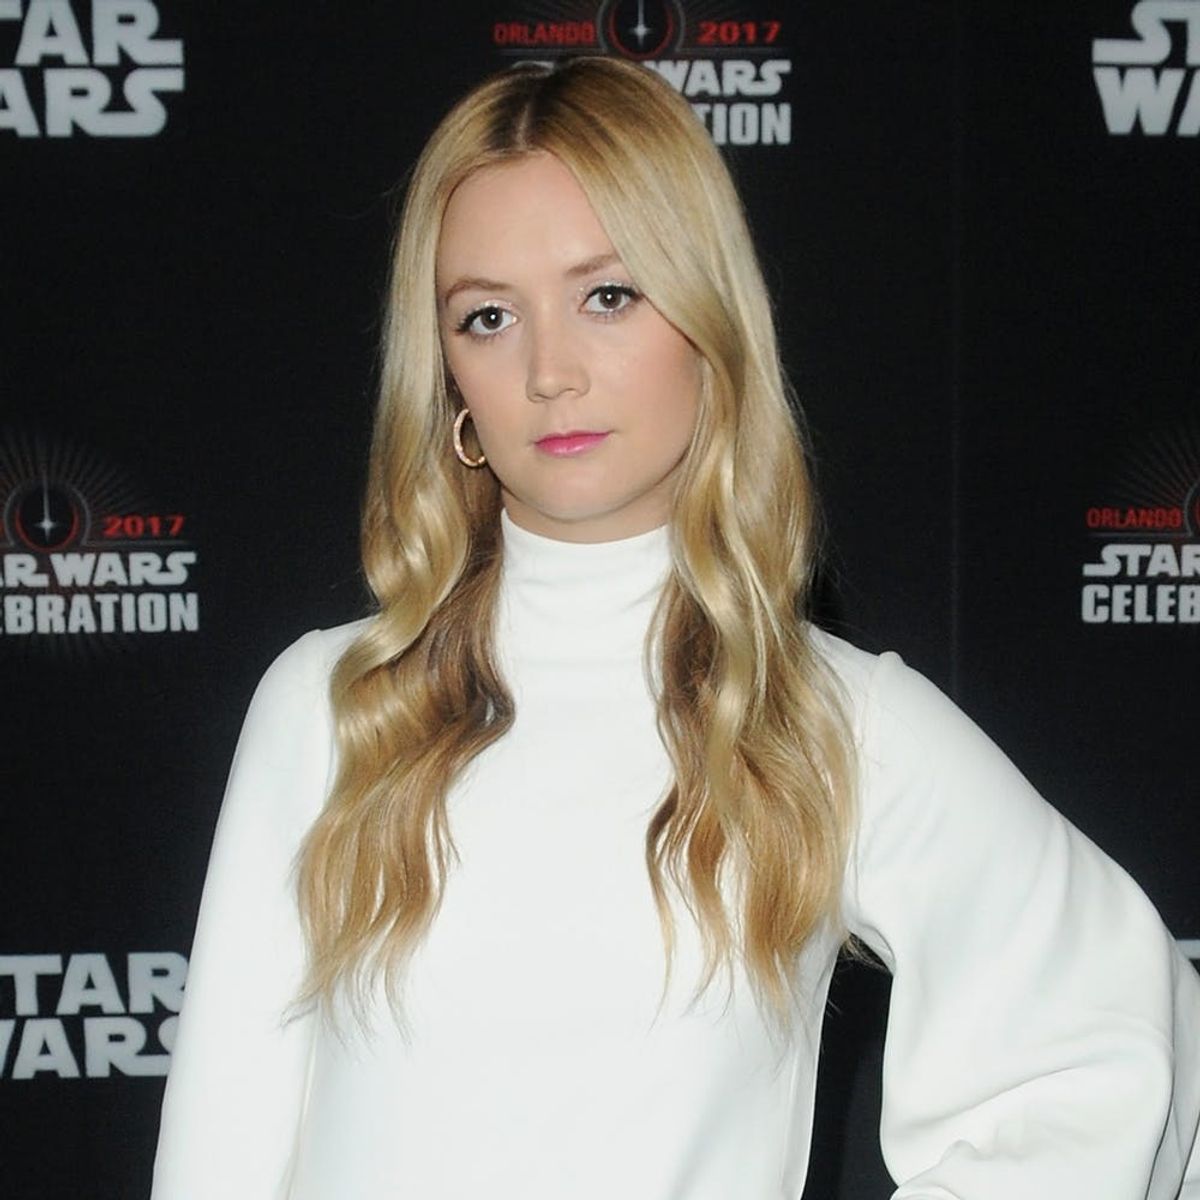 Billie Lourd’s D23 Speech About Her Late Mom, Carrie Fisher, Will Tug at Your Heartstrings